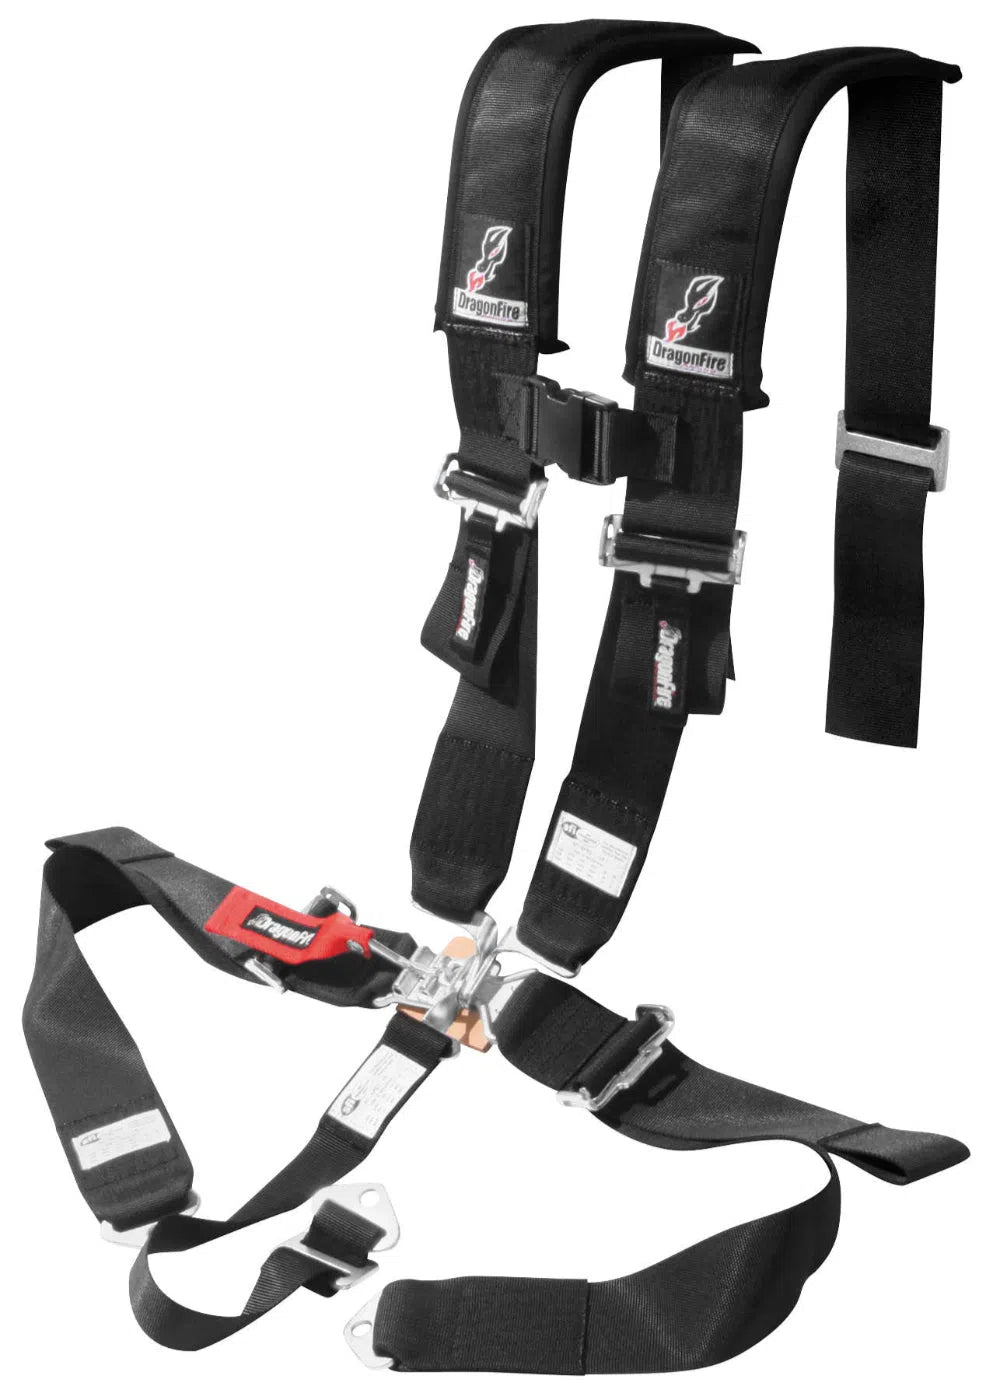 DragonFire Racing Harness Restraint - Black - H Style - 5-Point - 3" Buckle - 14-0037